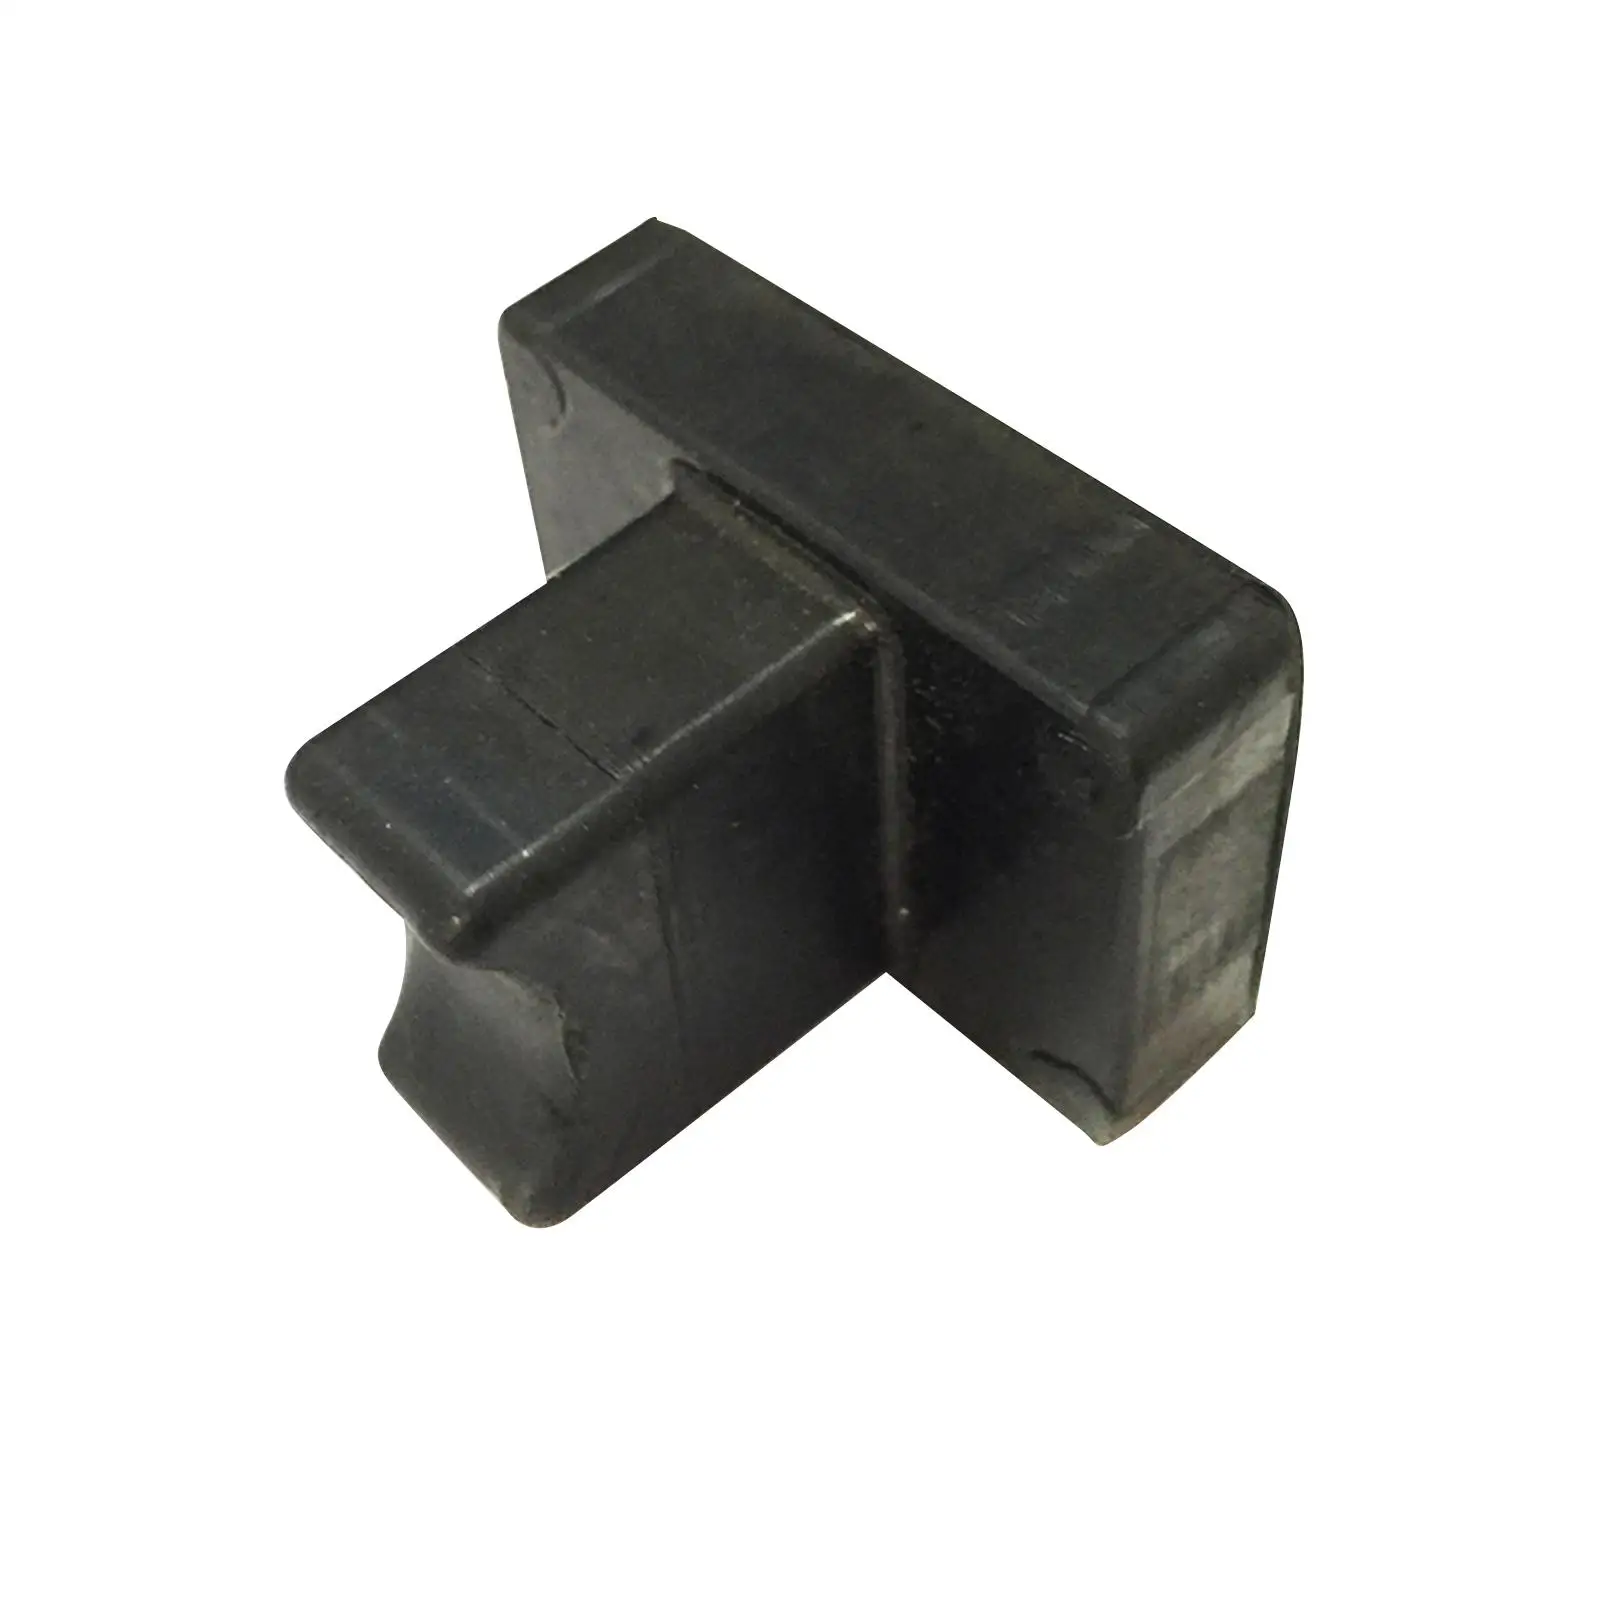 Outboard Motor Rubber Pad Durable Easy to Install Replaces Spare Parts Rubber Mat 3B2-61336-0-00 for Nissan Outboard Engine